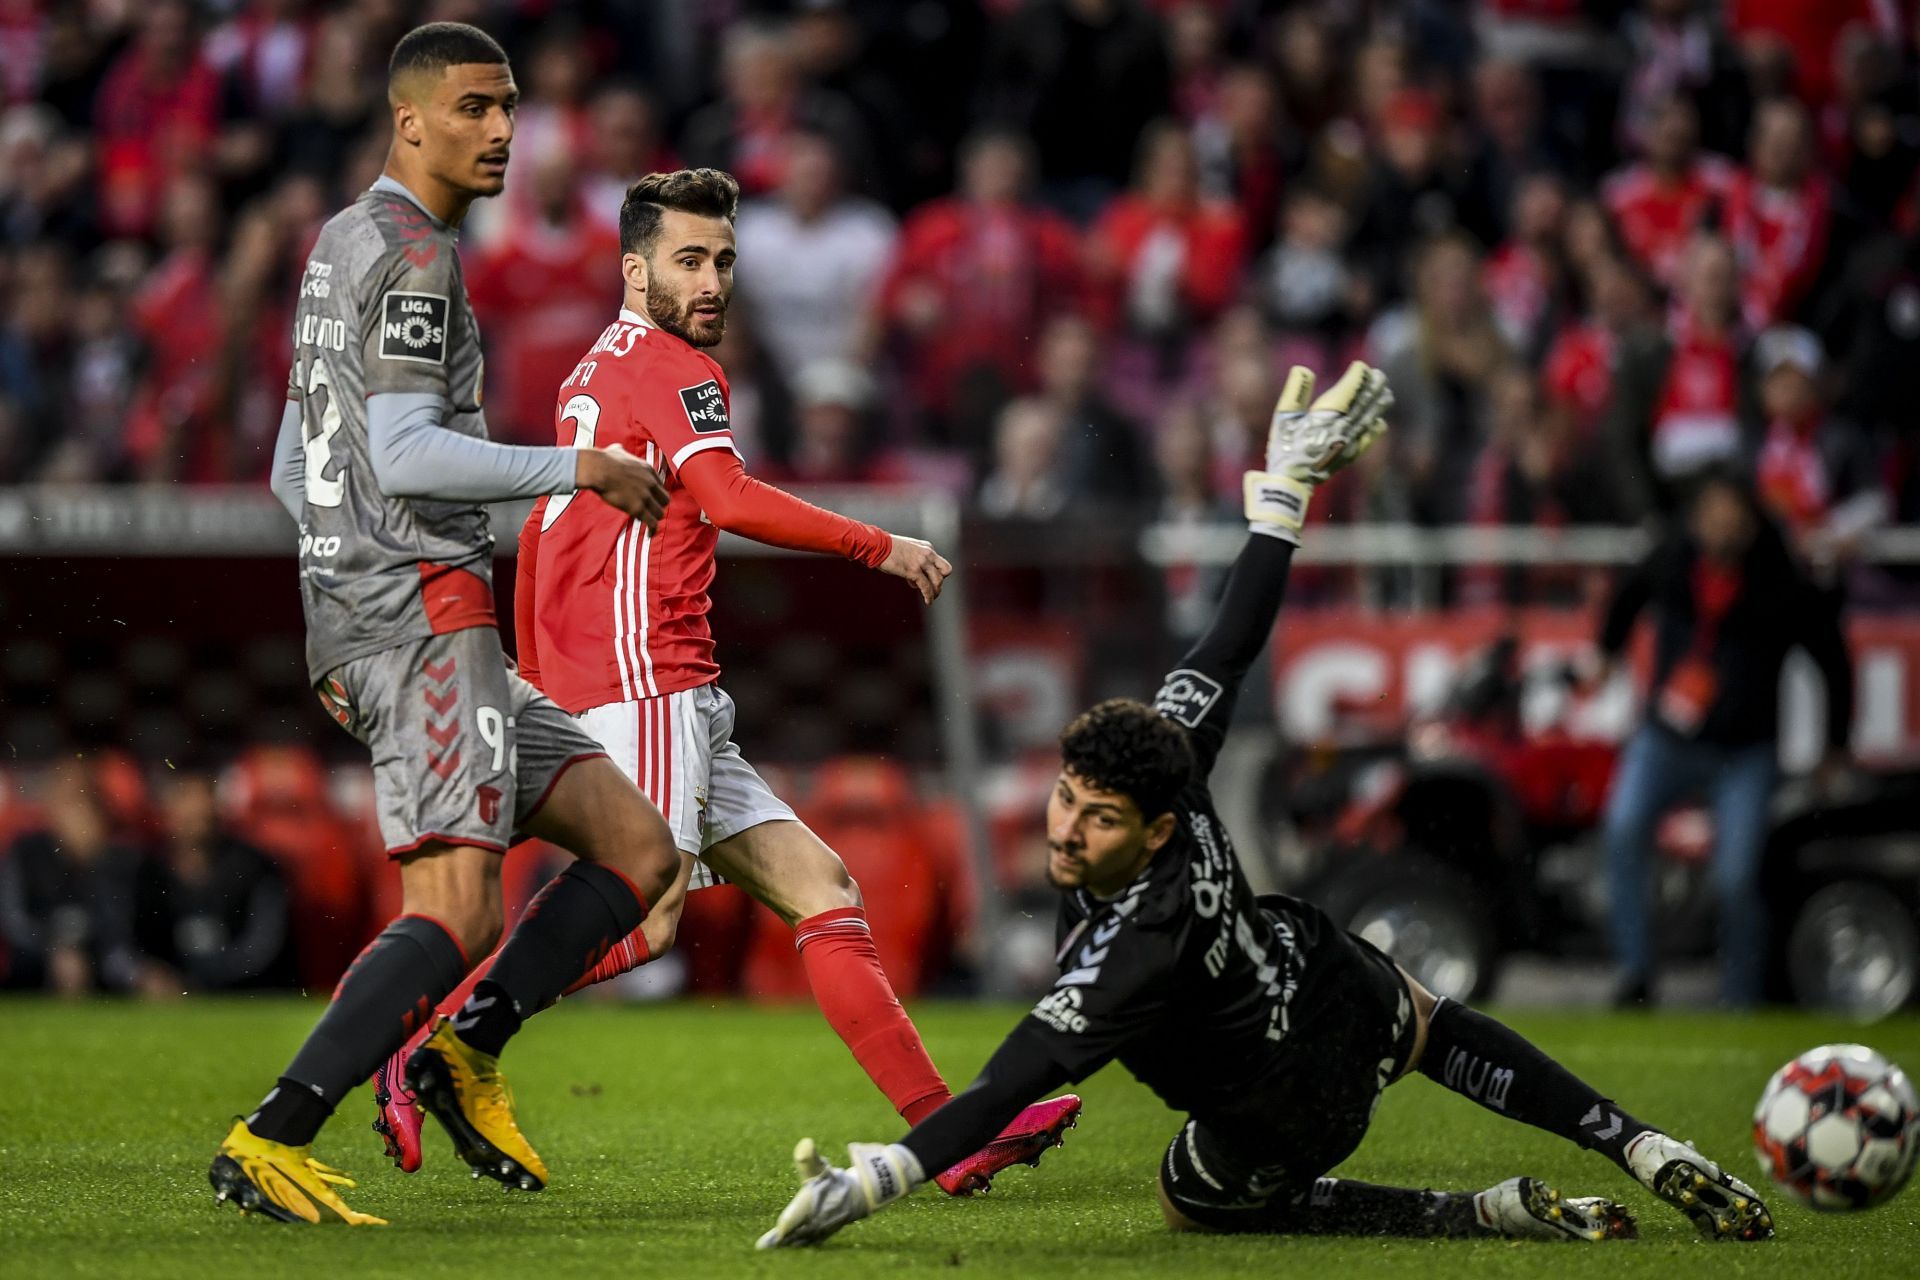 Braga and Benfica will square off in the Primeira Liga on Friday